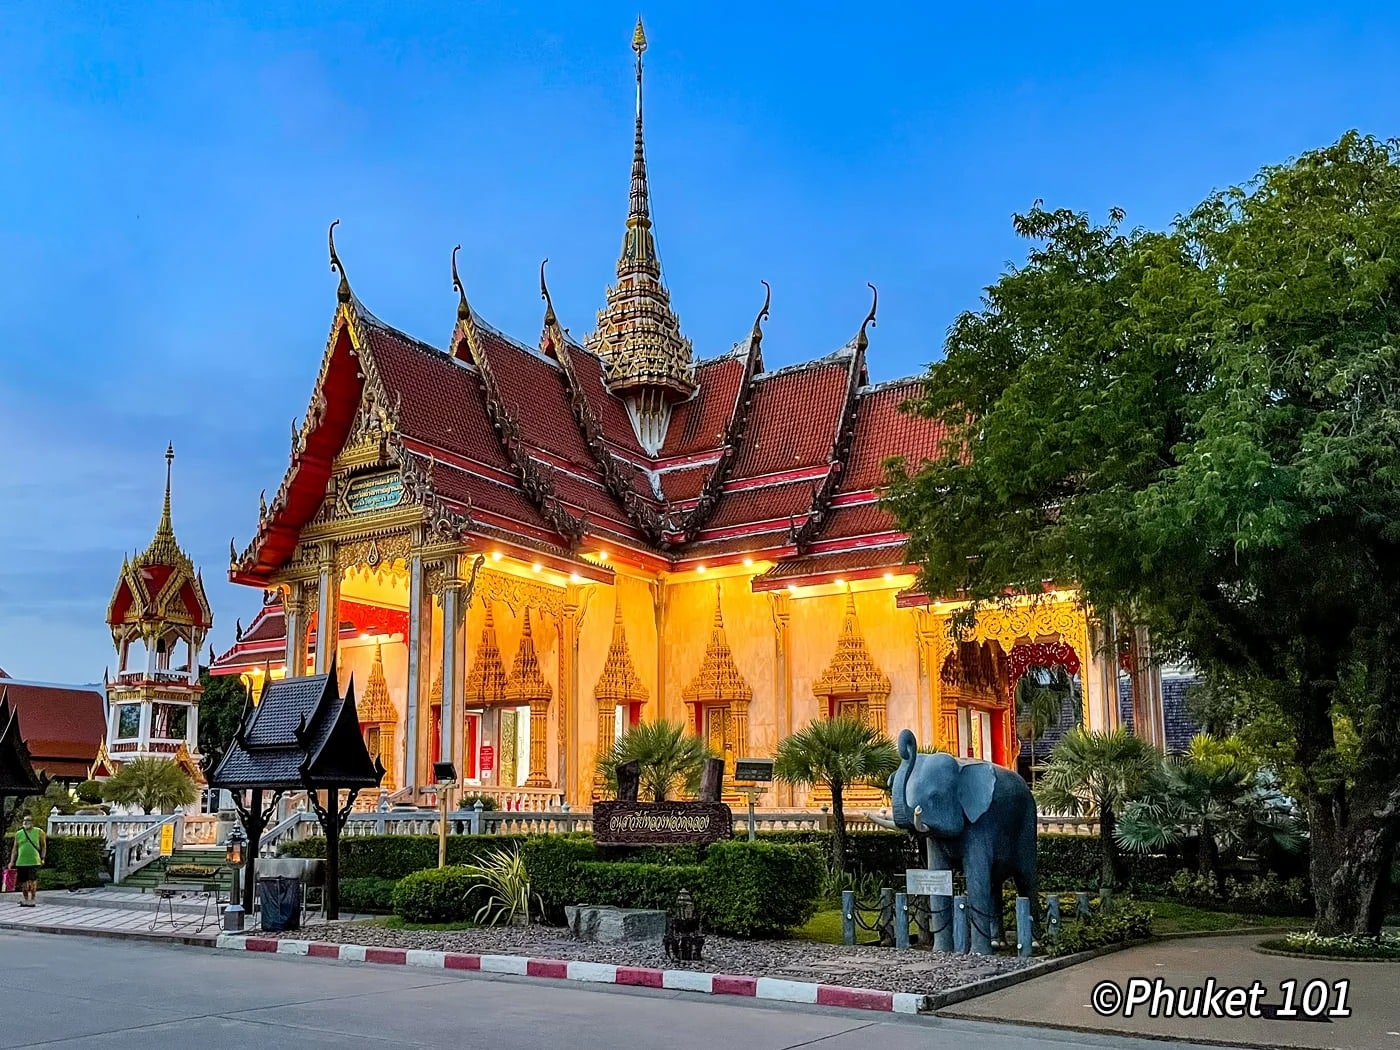 The Wat Chalong